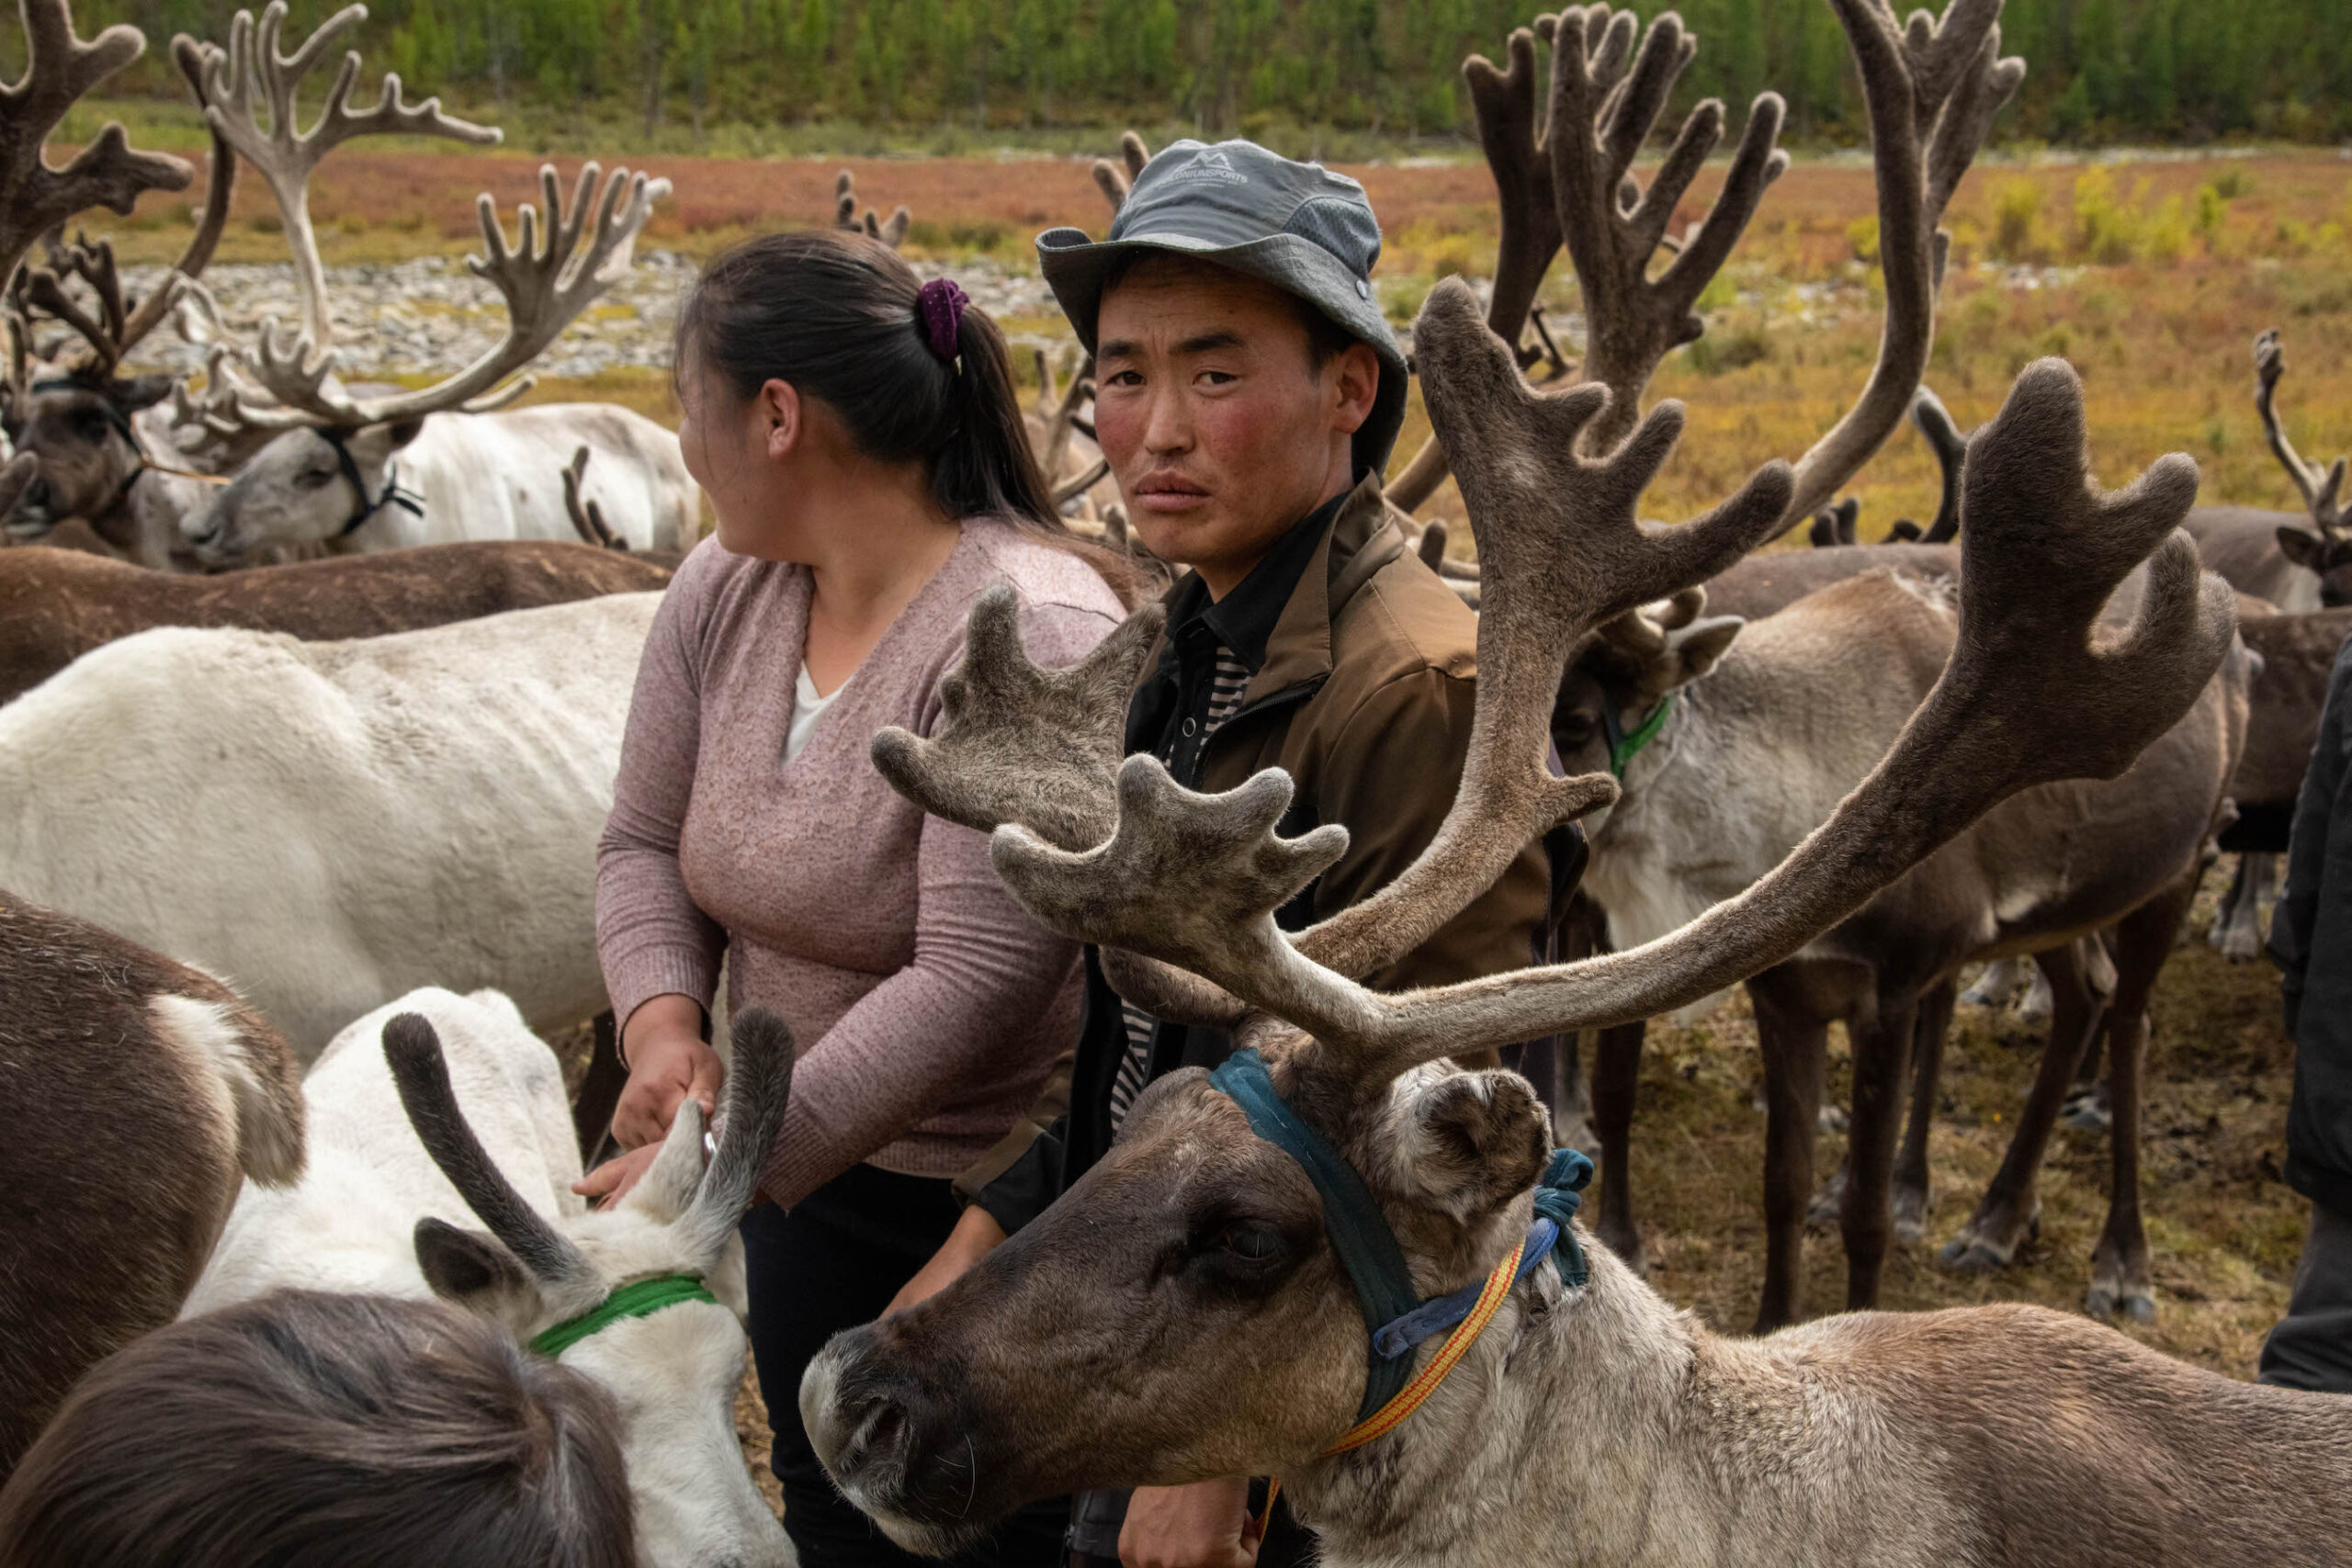 A couple, Mandah's son and his wife, stand in the middle of a herd of reindeer. The woman in a light pink sweater is looking across the herd, and the man is looking at the camera. He is wearing a blue hat and his face is framed by antlers in the foreground. 